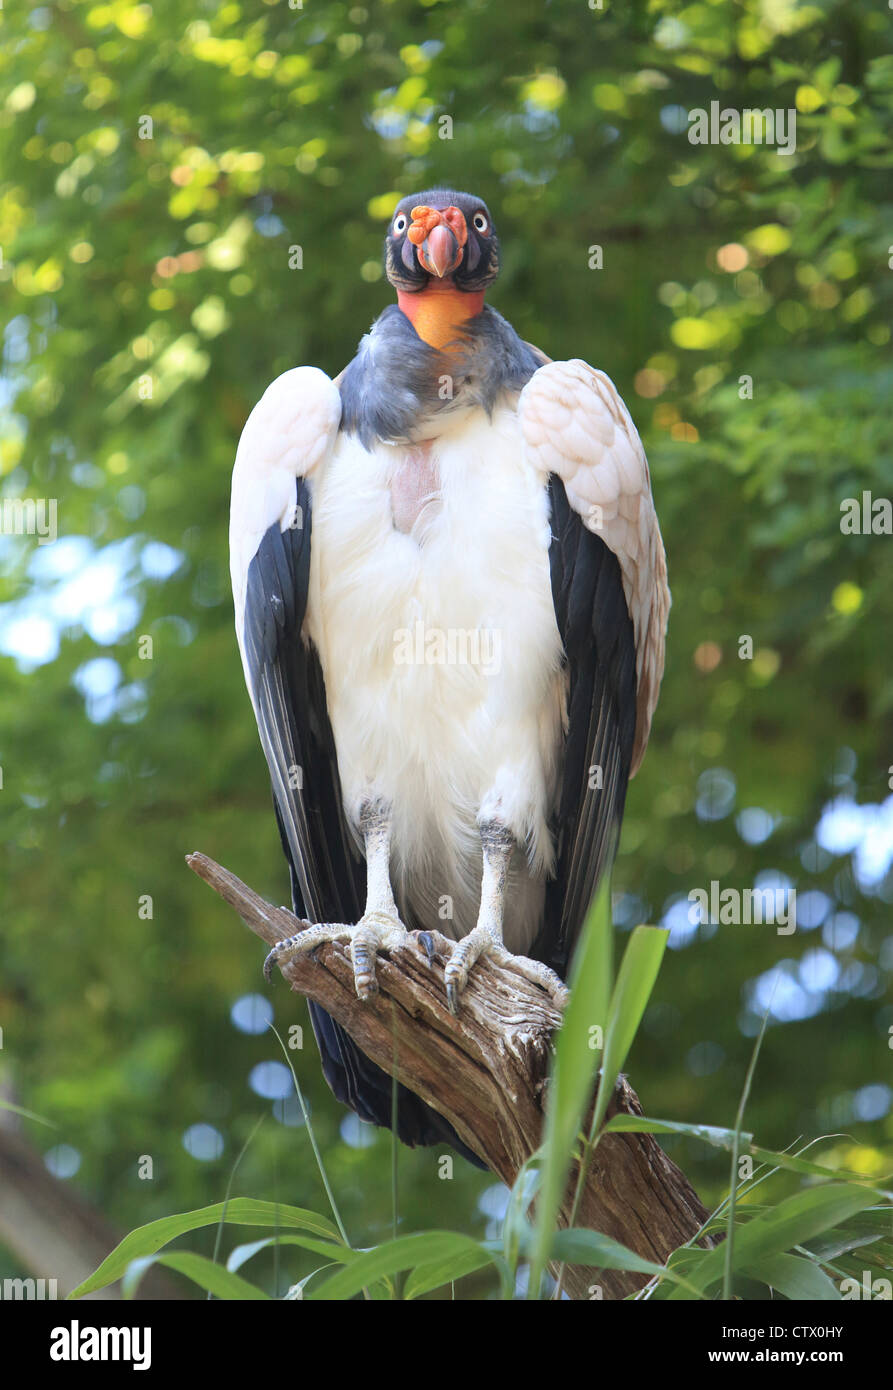 A king vulture, at London Zoo, in Regent's Park, London, England, UK Stock Photo